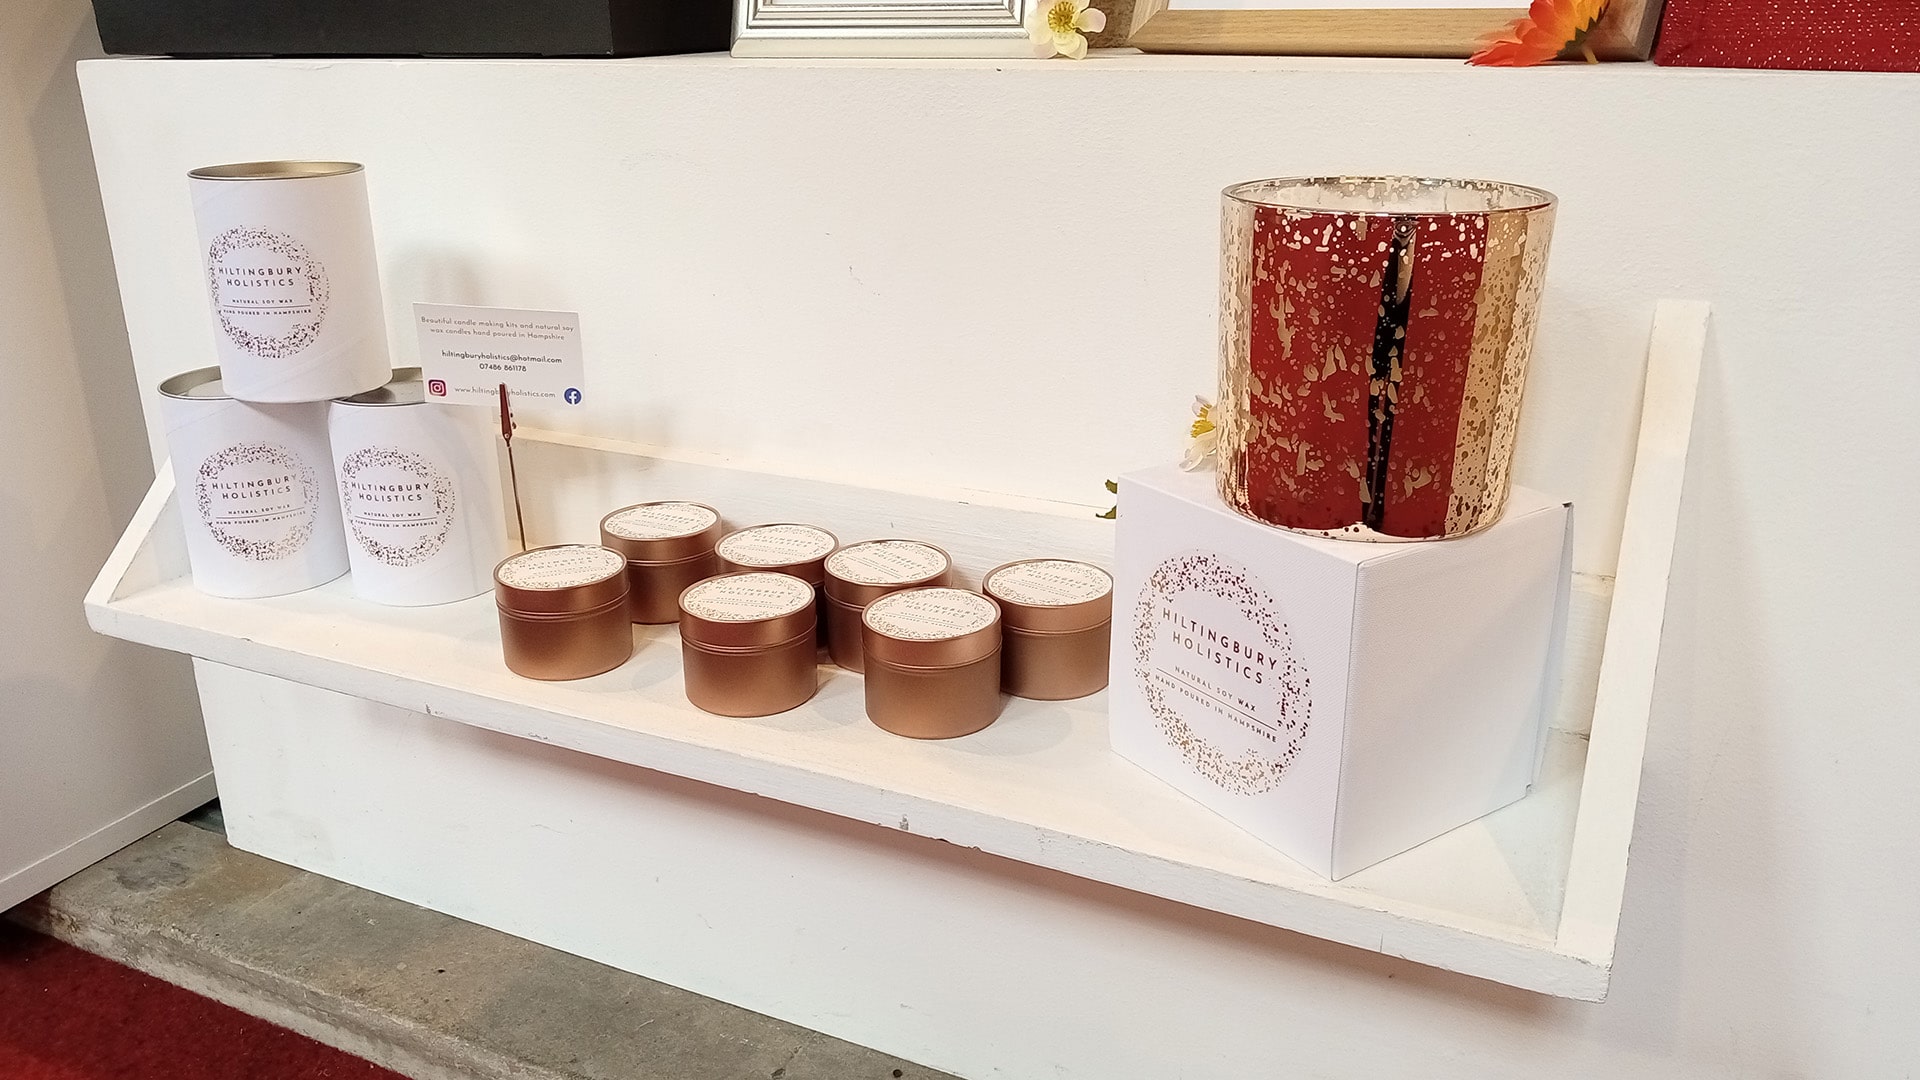 A photograph of golden candles laid out in a decorative way on a shelf.